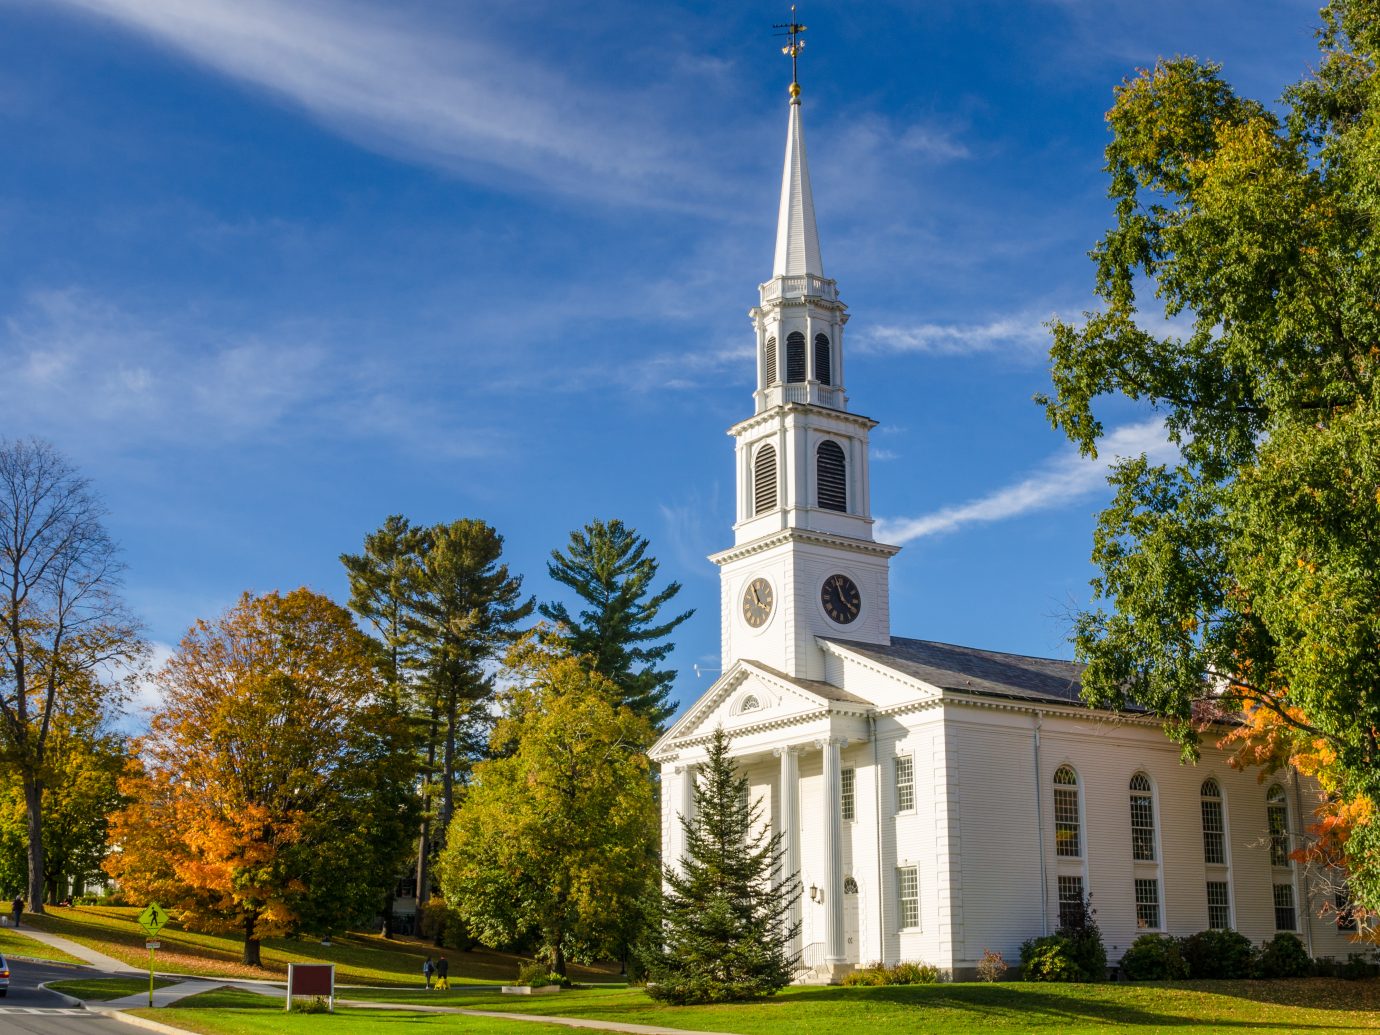 Traditional American White Church with a high Steeple in Williamstown, MA, on a Clear Autumn Day